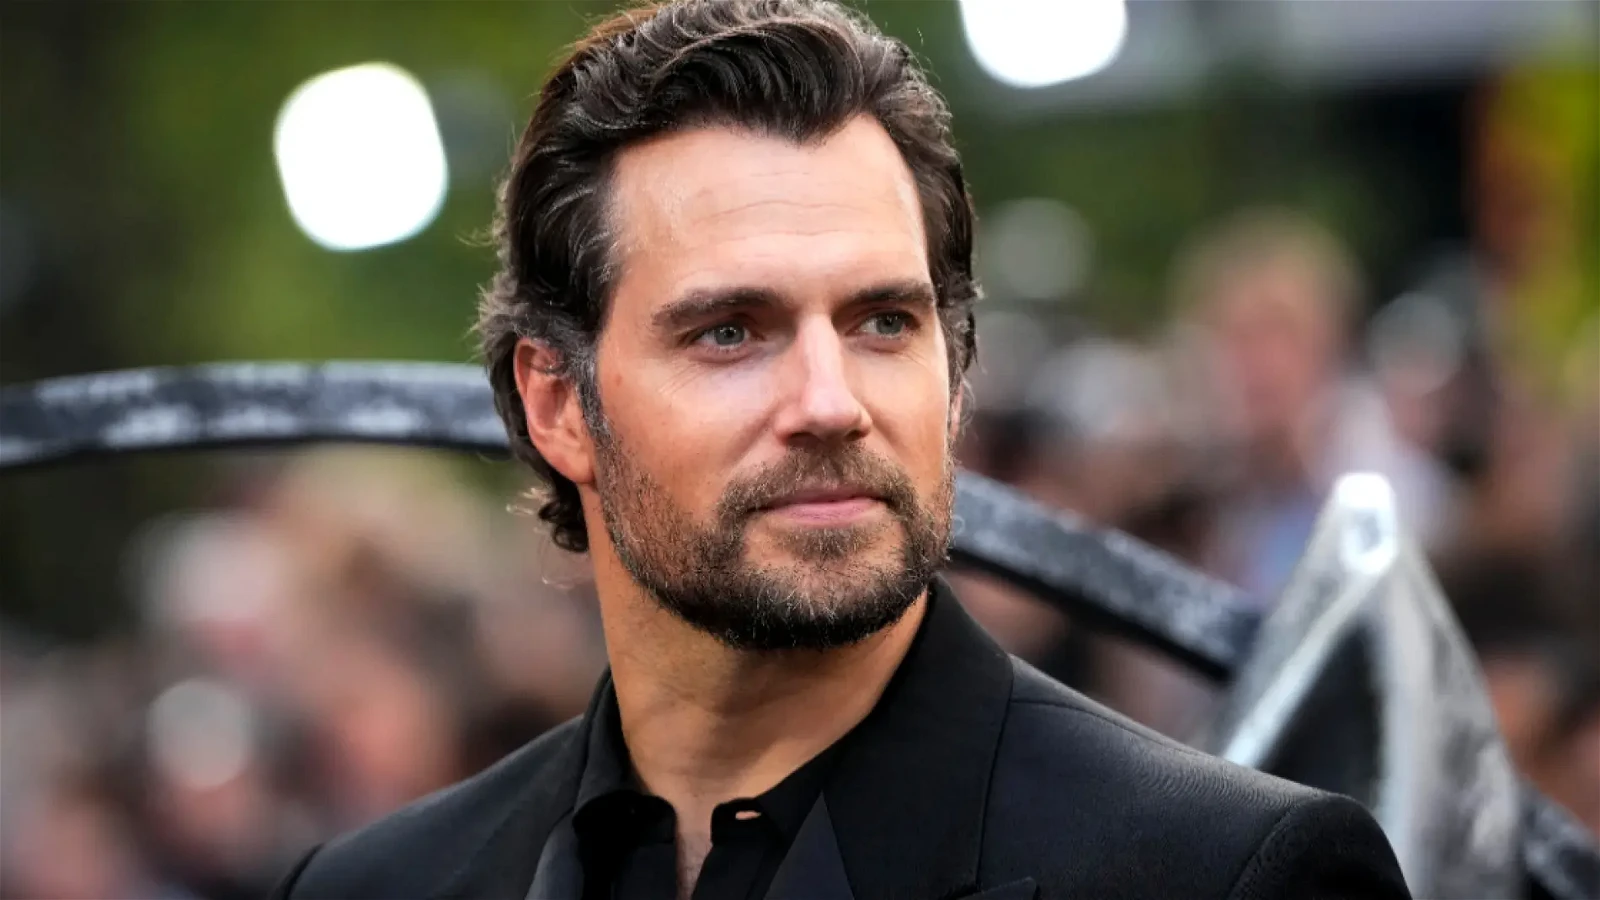 Henry Cavill has stepped down from The Witcher